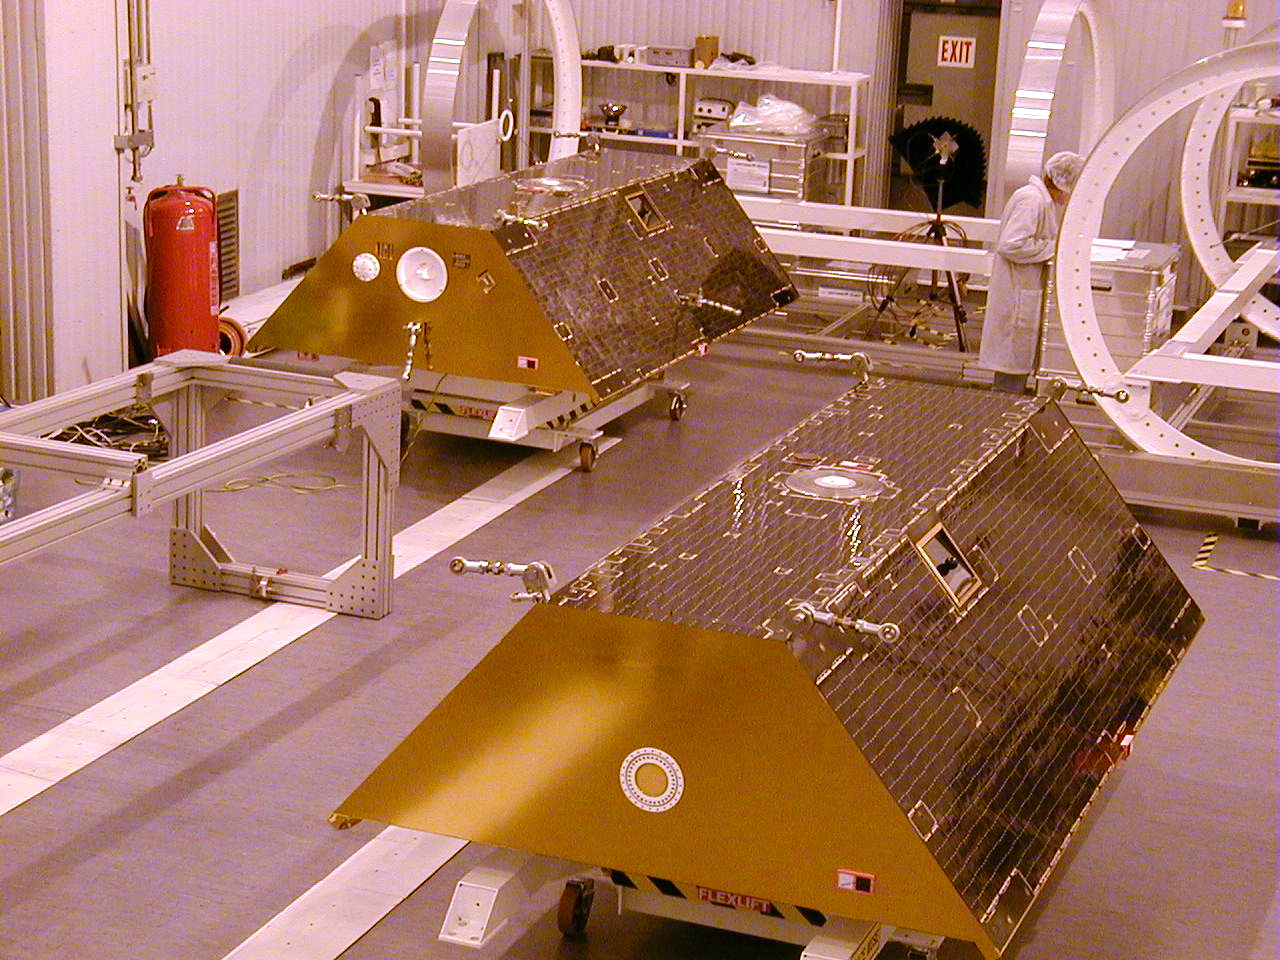 Two satellites are seen next to each other.